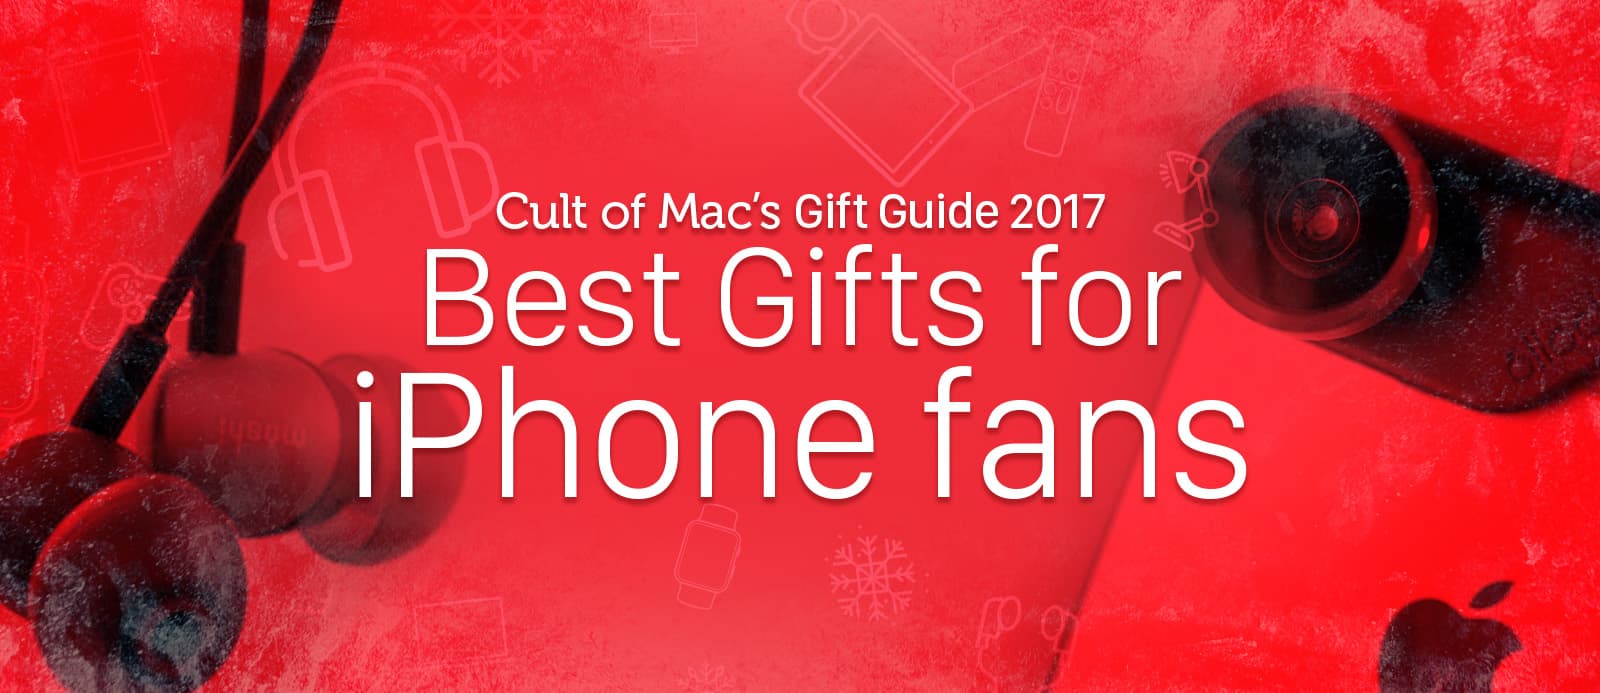 iPhone Gift Guide 2017